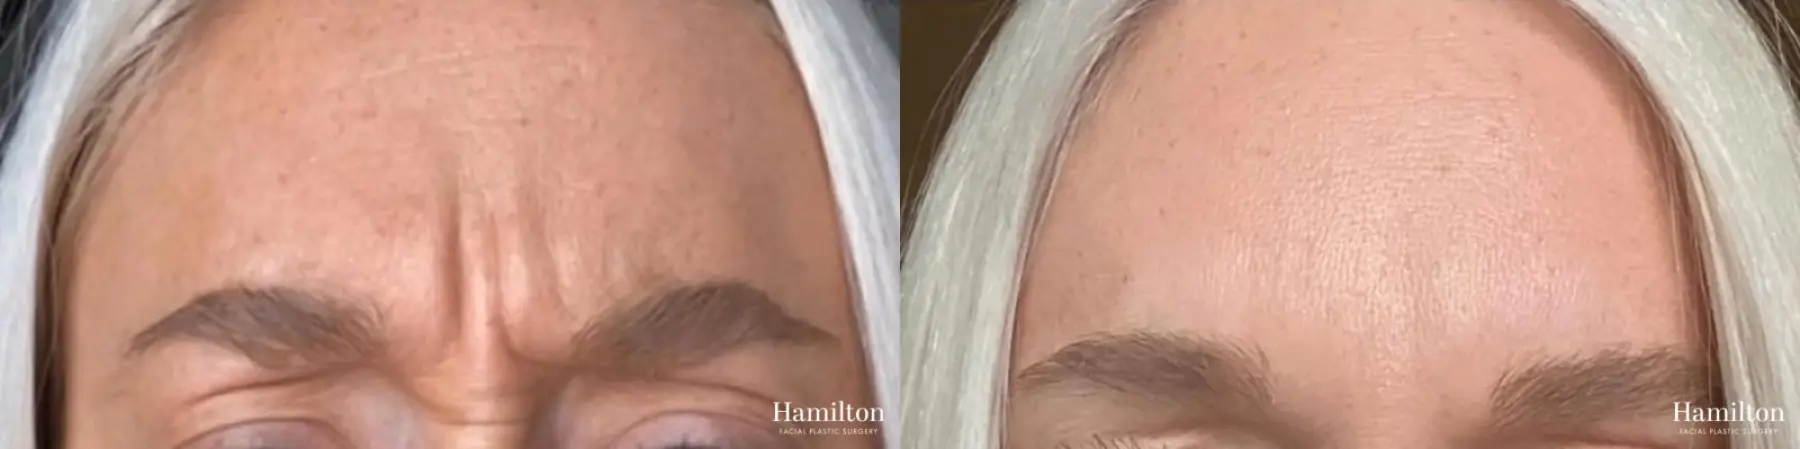 BOTOX® Cosmetic: Patient 1 - Before and After 2